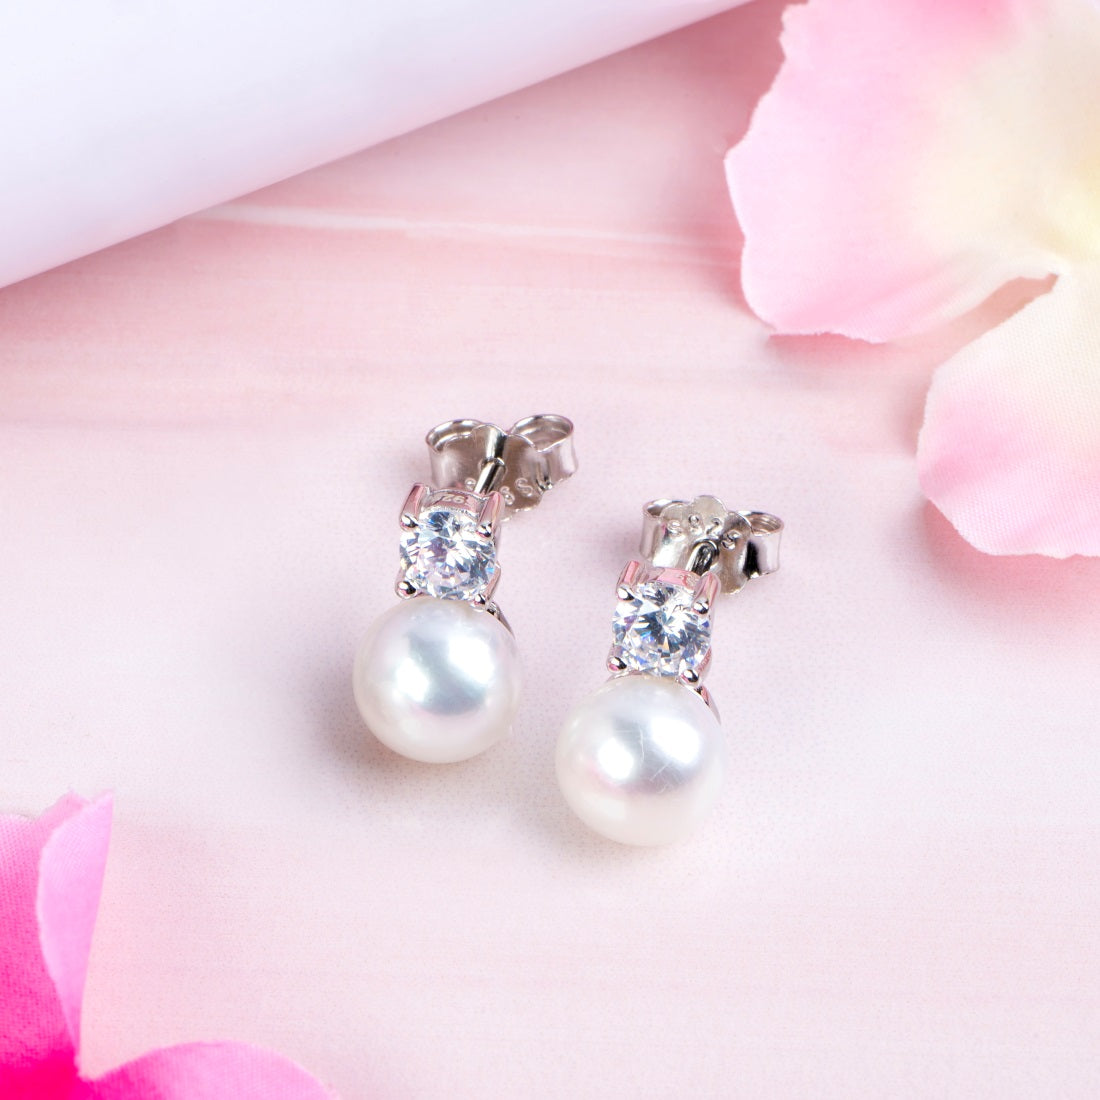 Pearlescent Radiance Rhodium-Plated 925 Sterling Silver Earrings with CZ